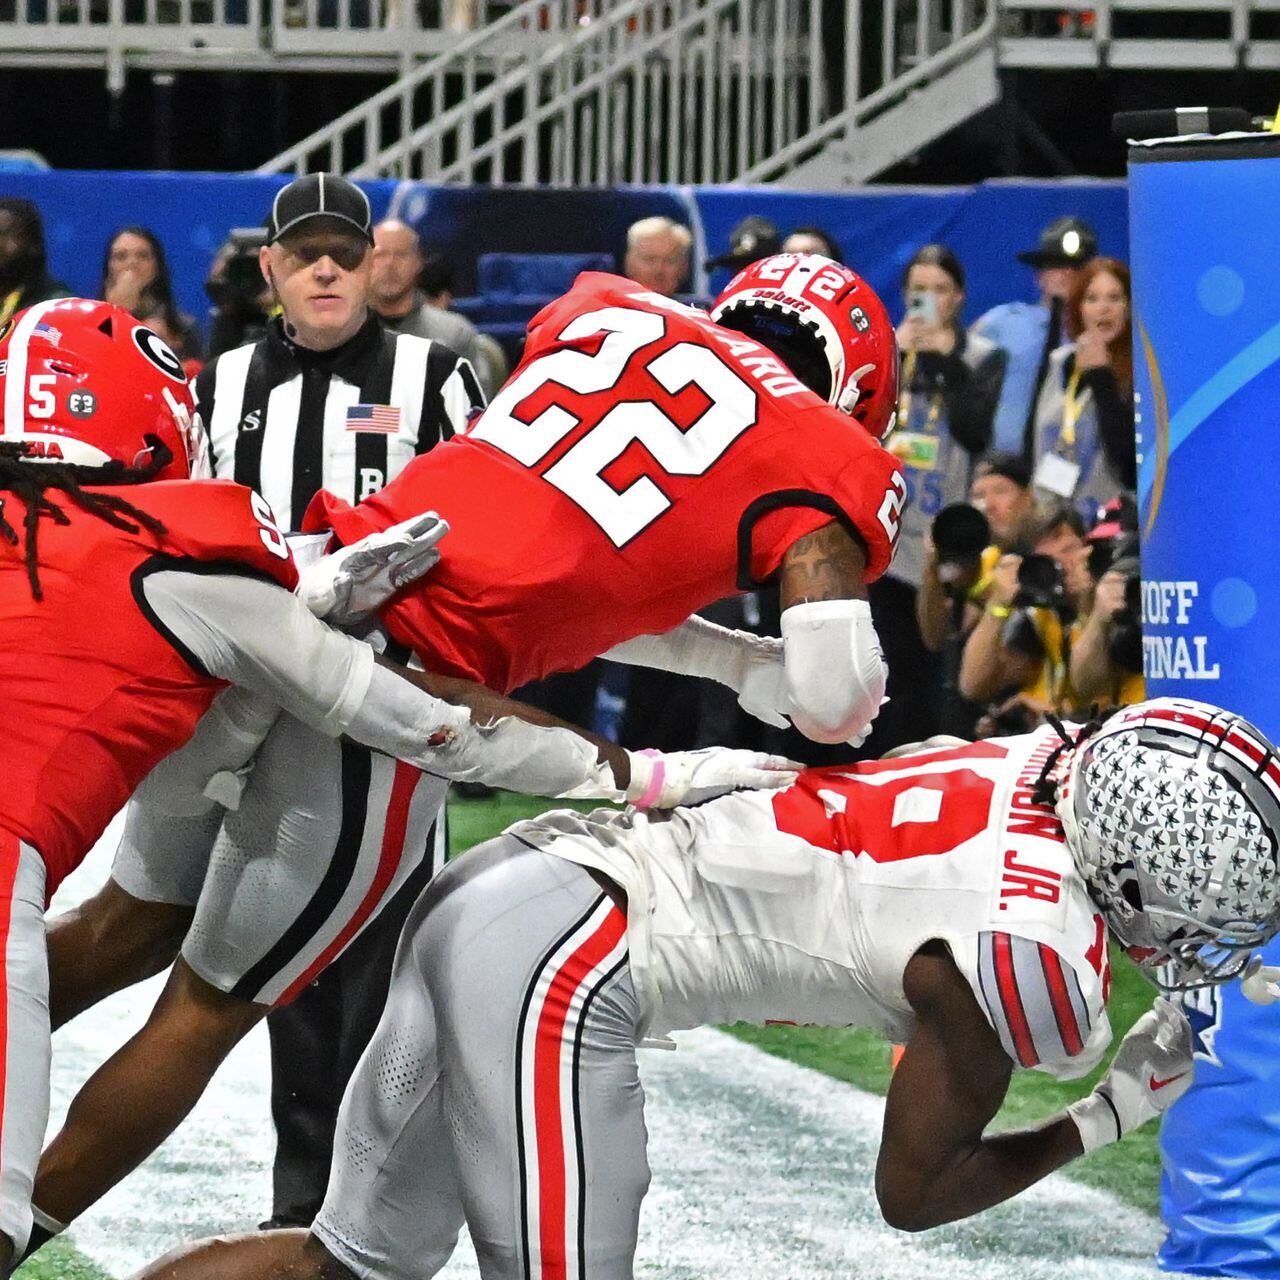 Ohio State's Marvin Harrison Jr. making own impact as a WR